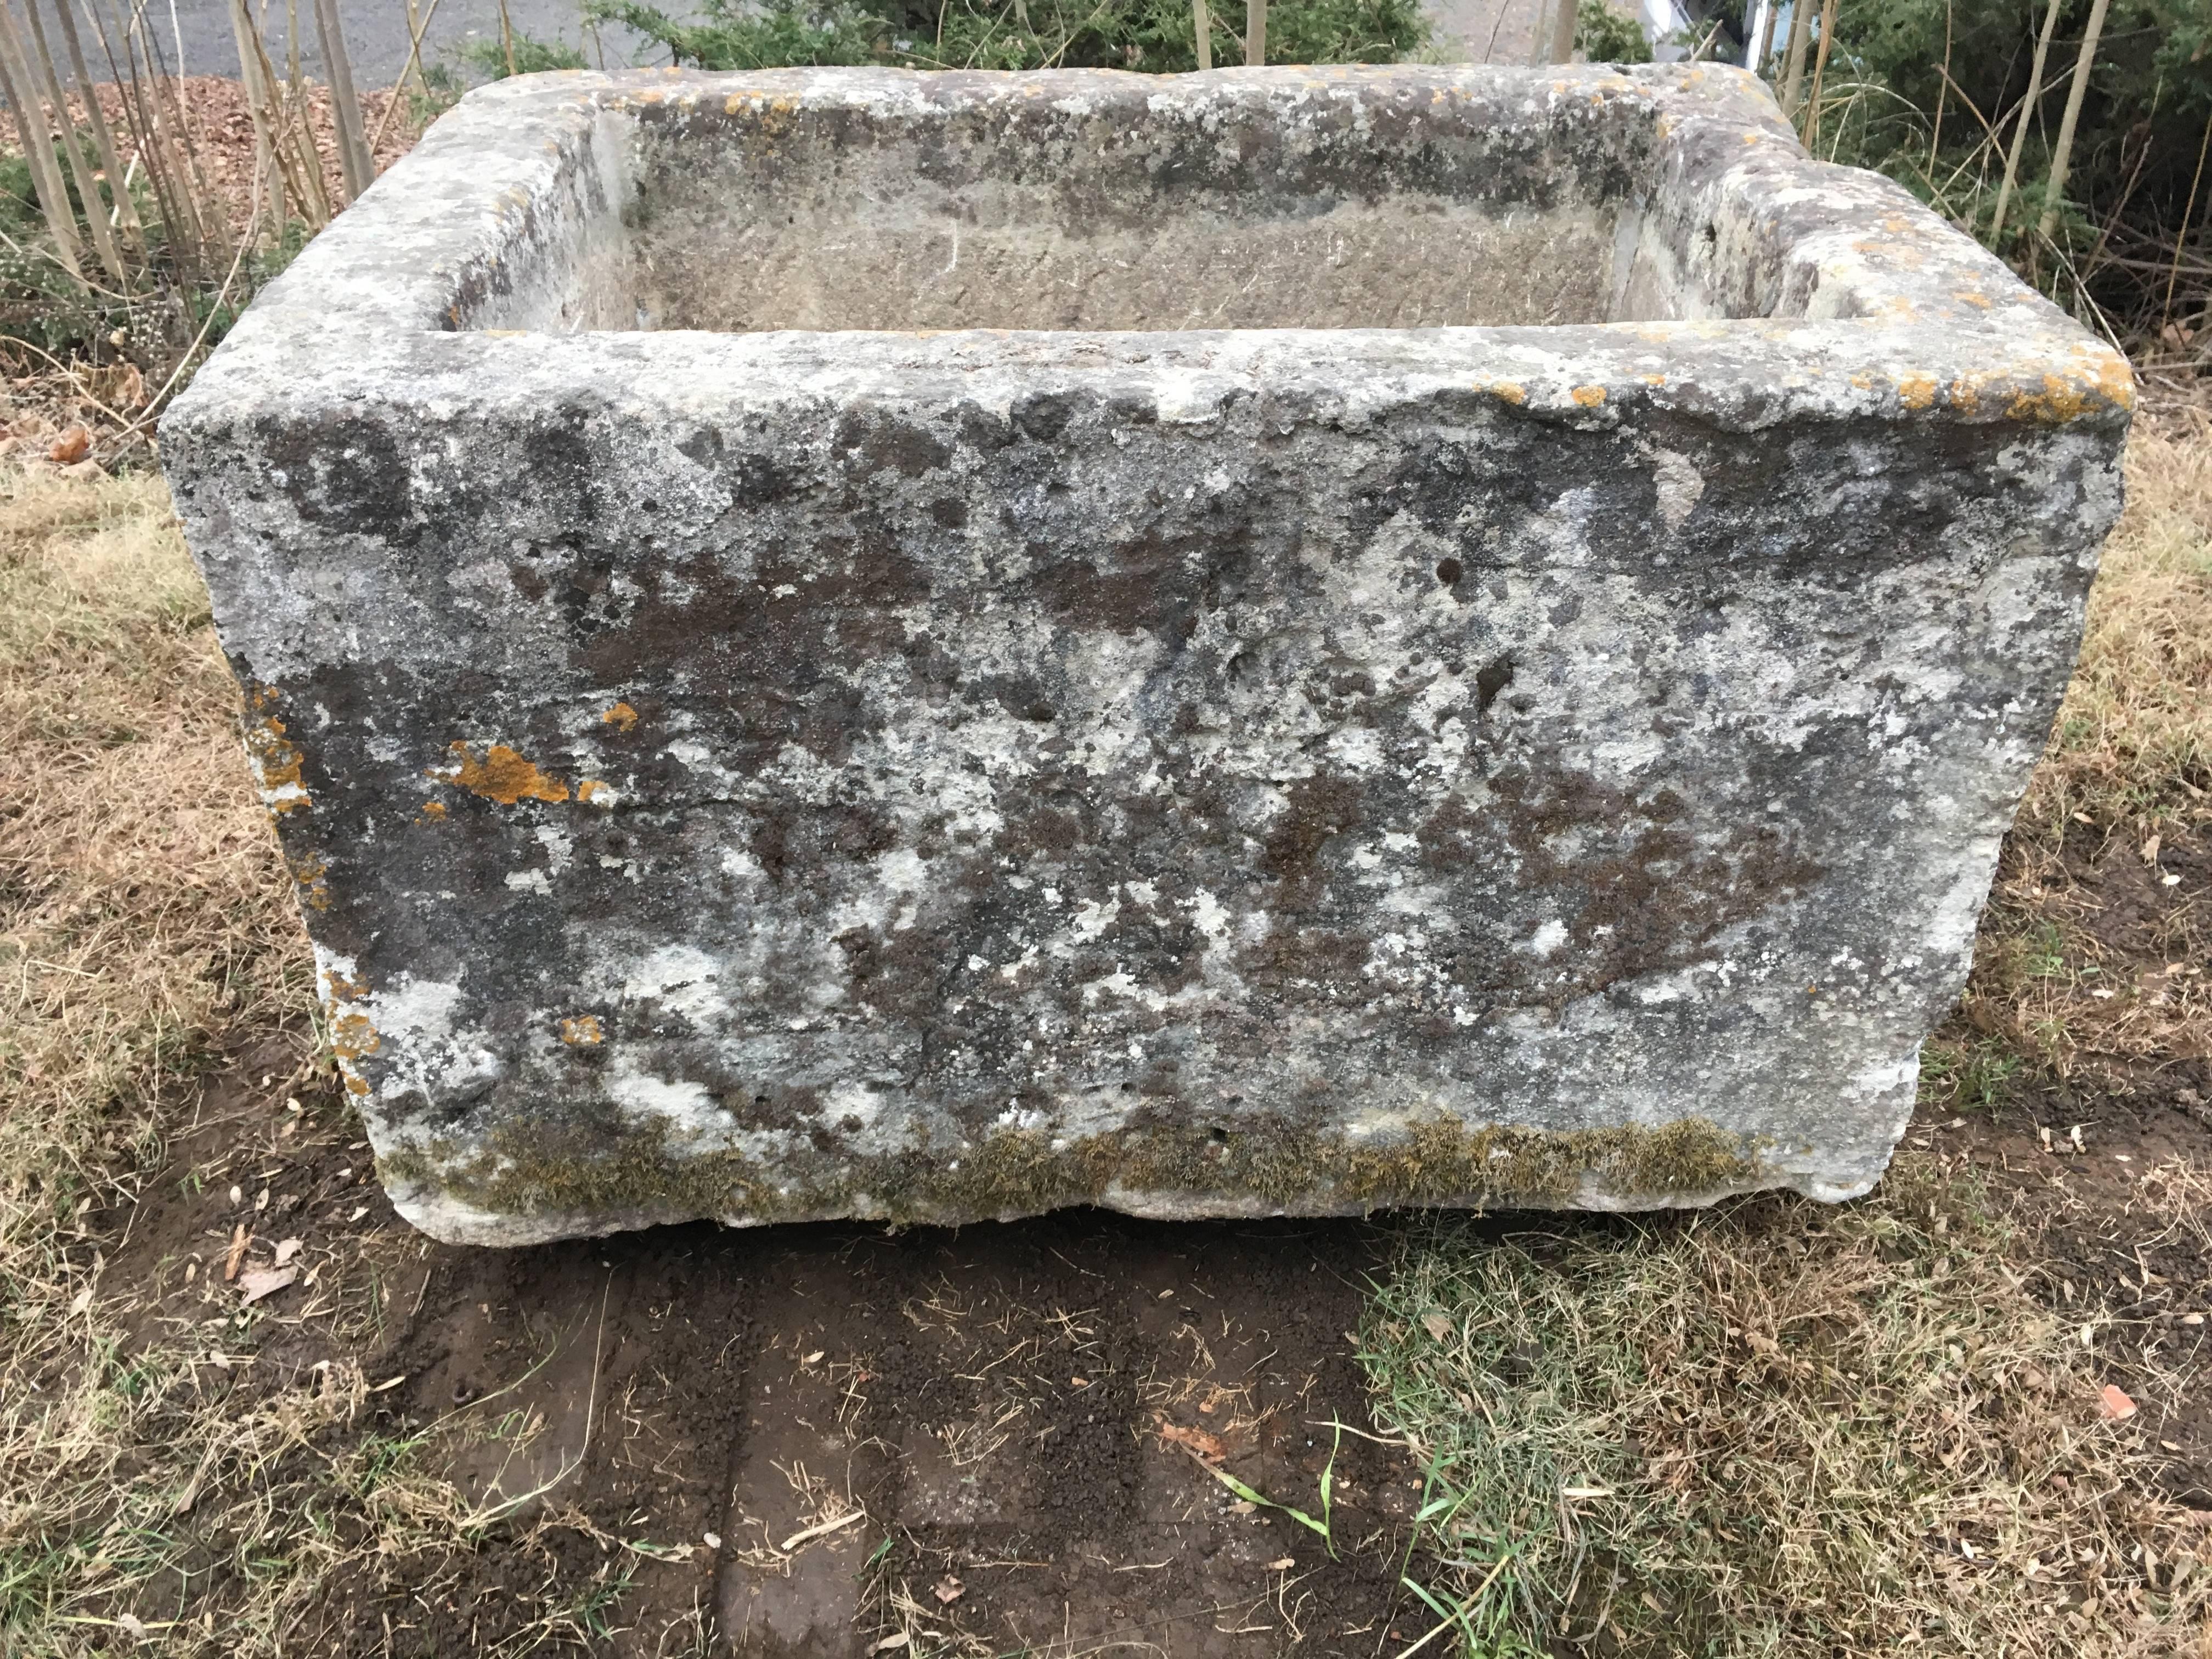 This late 18th century hand-carved limestone trough is relatively petite compared to CTR 1016 and CTR 1018, but its stunning patina and more manageable size make it an excellent candidate as a strong focal point in a medium-sized garden. The patina